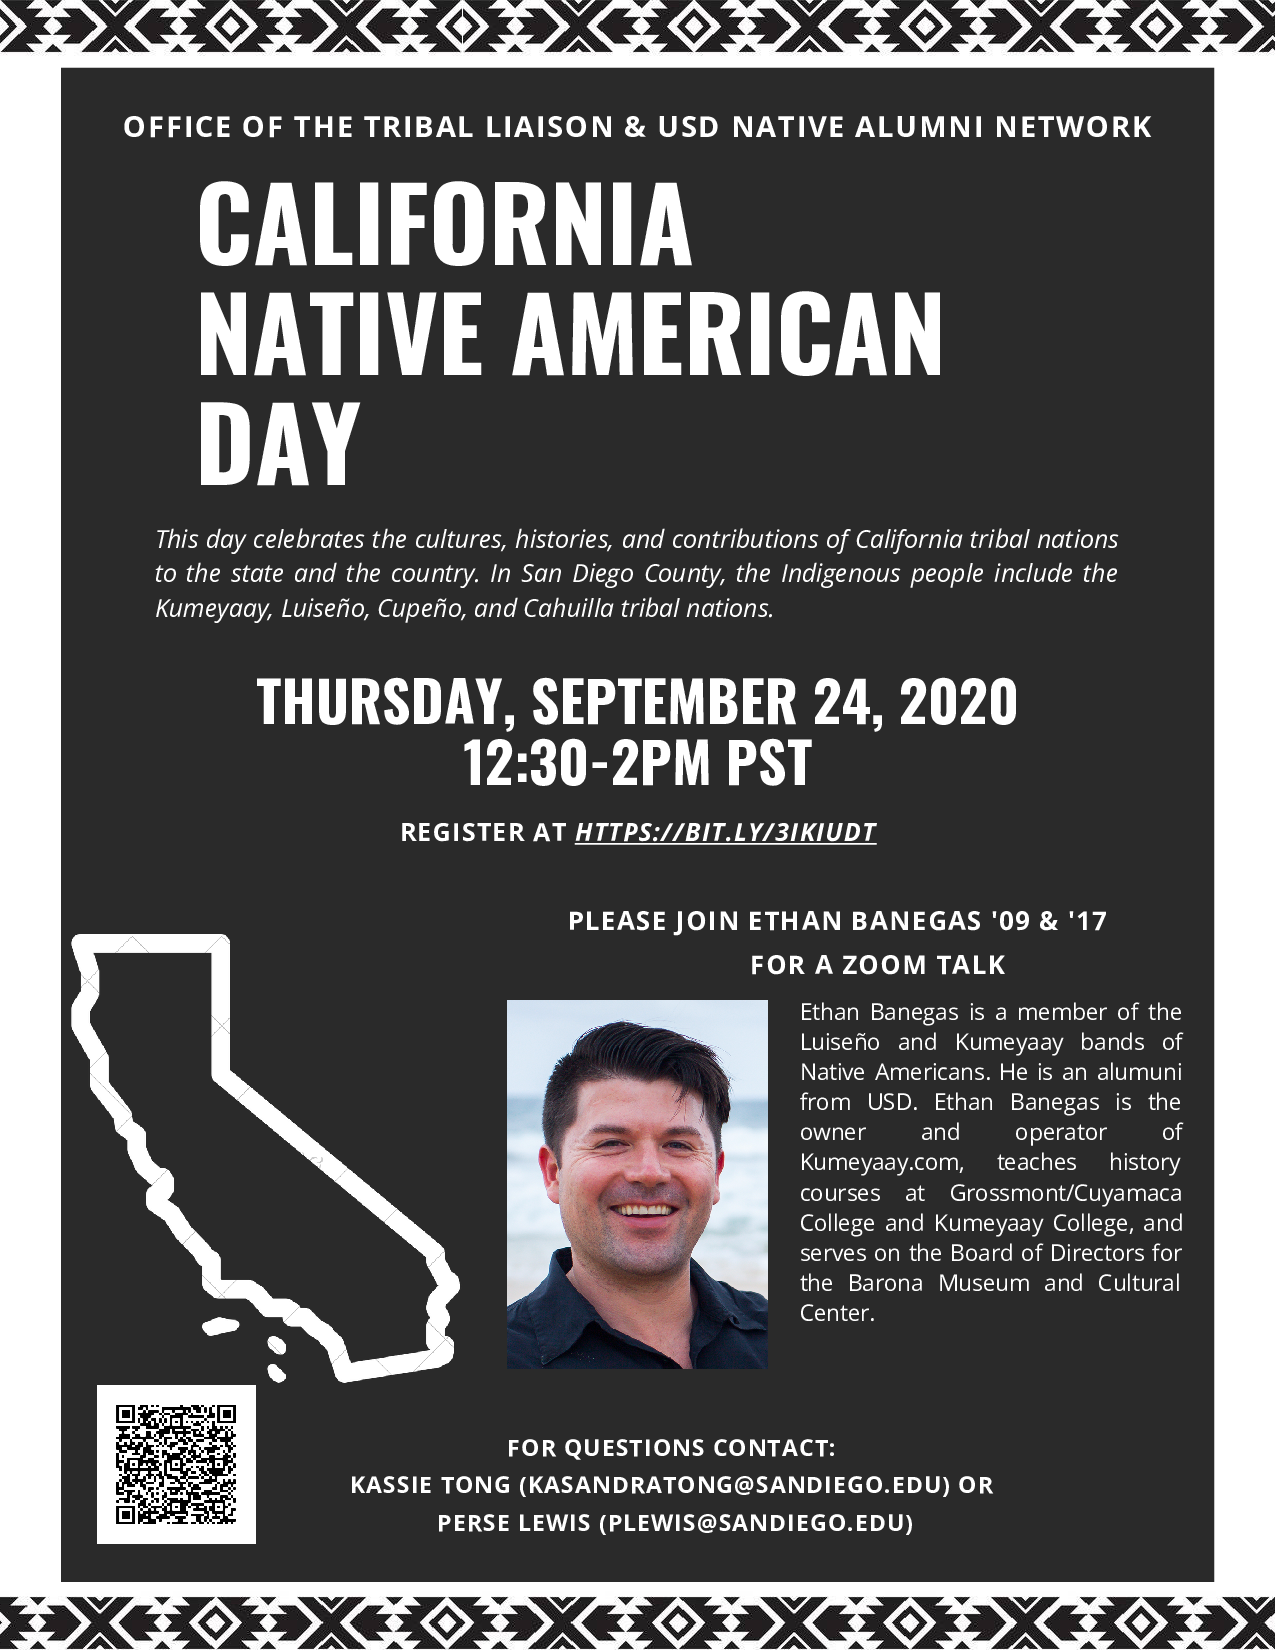 Black and White Flyer with information on the Office of the Tribal Liaison's and USD Native Alumni Network California Native American Day Event